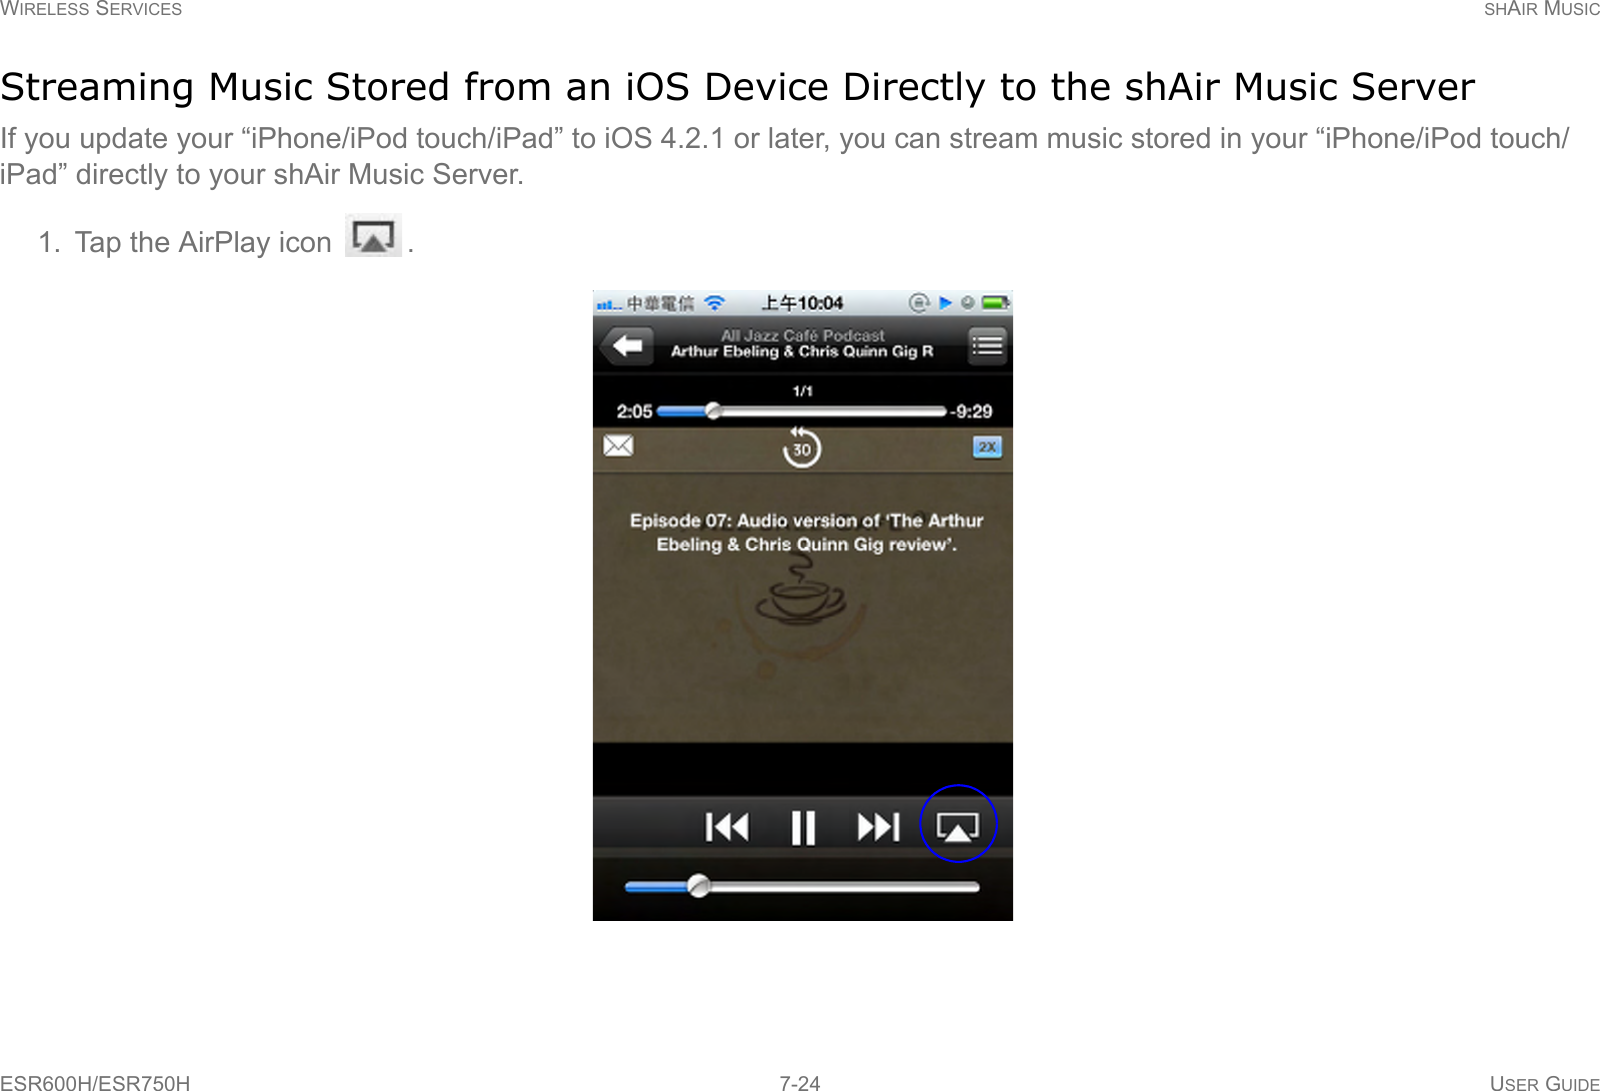 WIRELESS SERVICES SHAIR MUSICESR600H/ESR750H 7-24 USER GUIDEStreaming Music Stored from an iOS Device Directly to the shAir Music ServerIf you update your “iPhone/iPod touch/iPad” to iOS 4.2.1 or later, you can stream music stored in your “iPhone/iPod touch/iPad” directly to your shAir Music Server.1. Tap the AirPlay icon  .